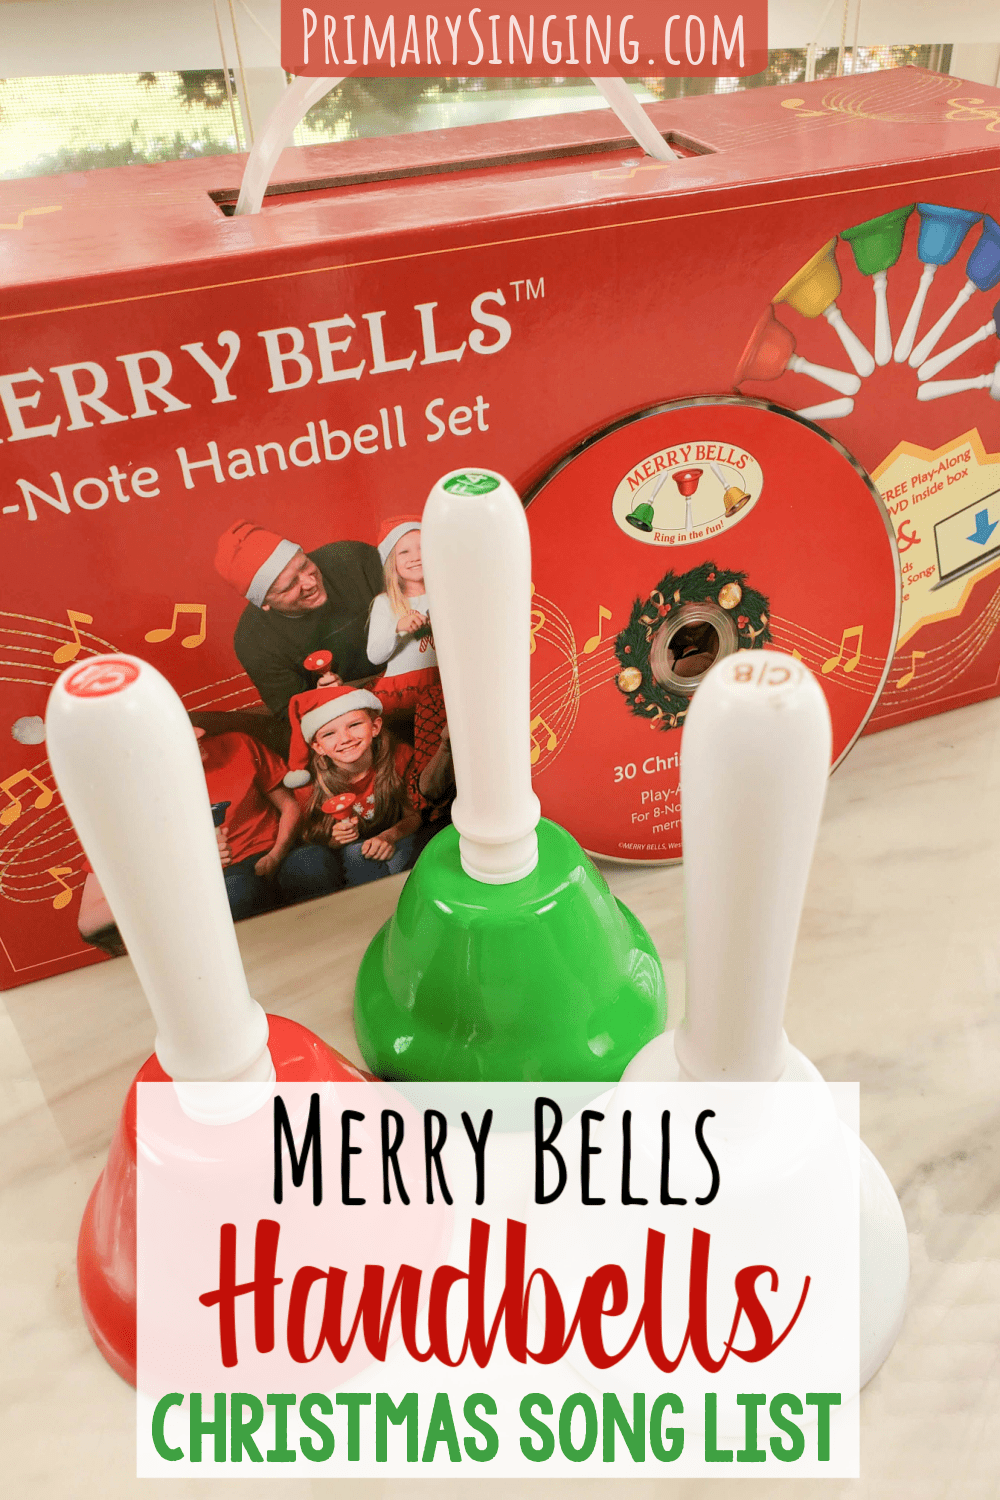 Merry Bells Christmas Song List - A fun holiday tradition with your family perfect for 4-8 people or add a second handbells set to expand to more participants! See all the Merry Bells Handbells charts and Play-Along DVDs for Christmas, Primary, Hymns, Children's songs, and Patriotic songs.